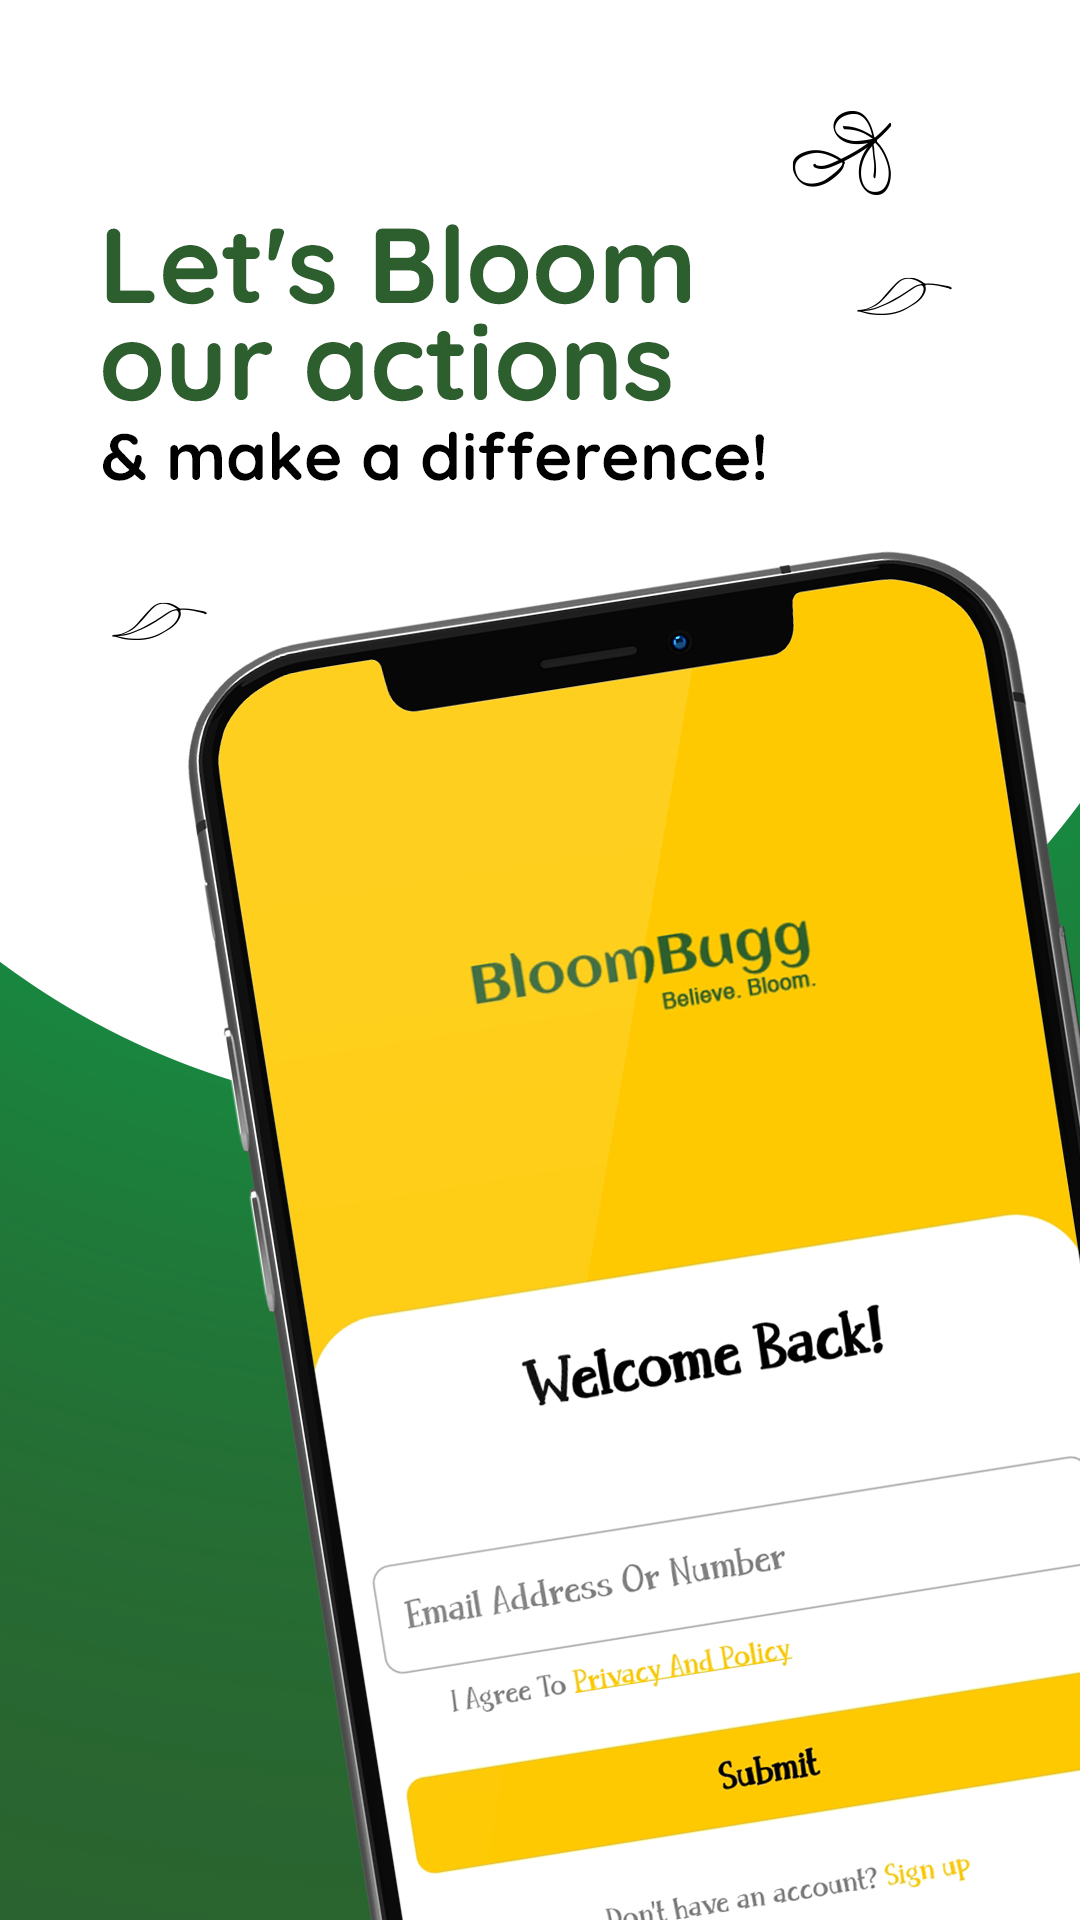 The BloomBugg application unlocks the secrets to a sustainable way of living.